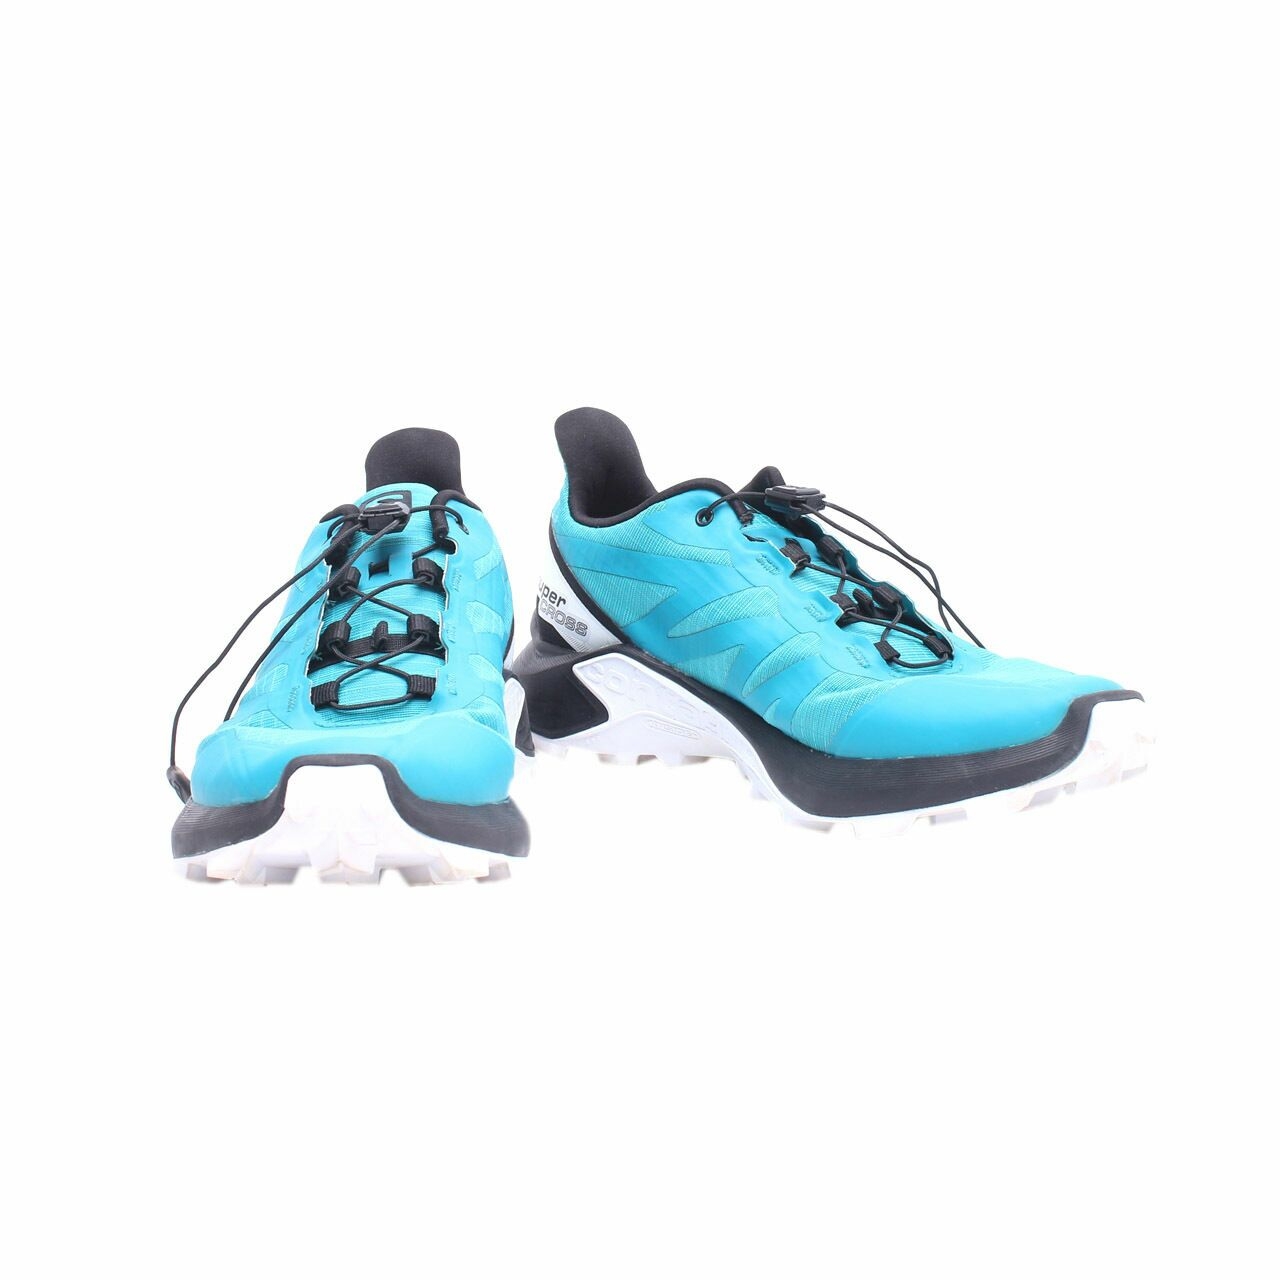 Salomon  Supercross Women's Trail Running Shoes Turquoise Turquoise Sneakers